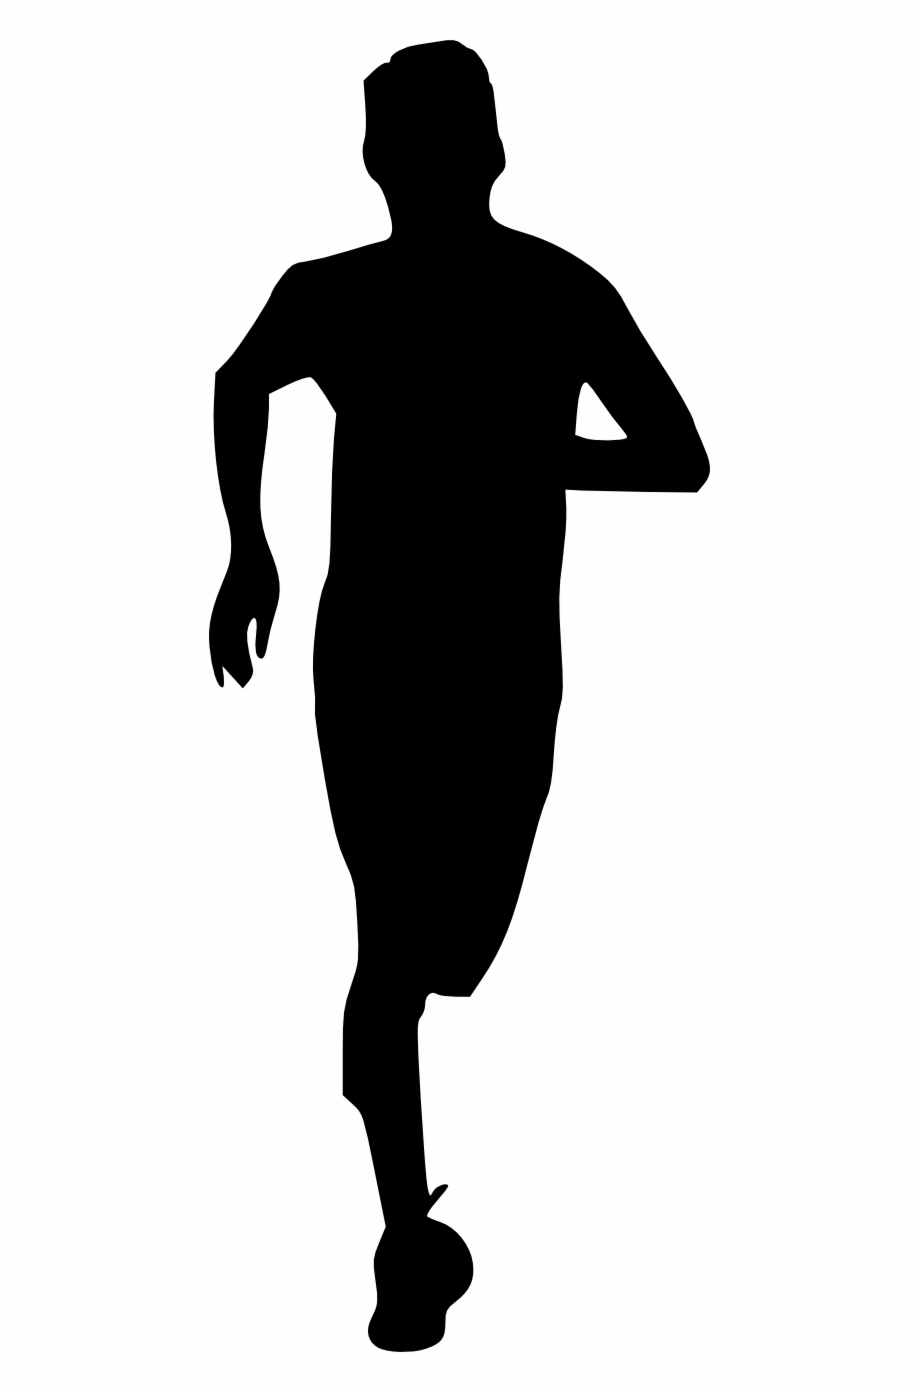 Free Man Silhouette Transparent Background, Download Free.